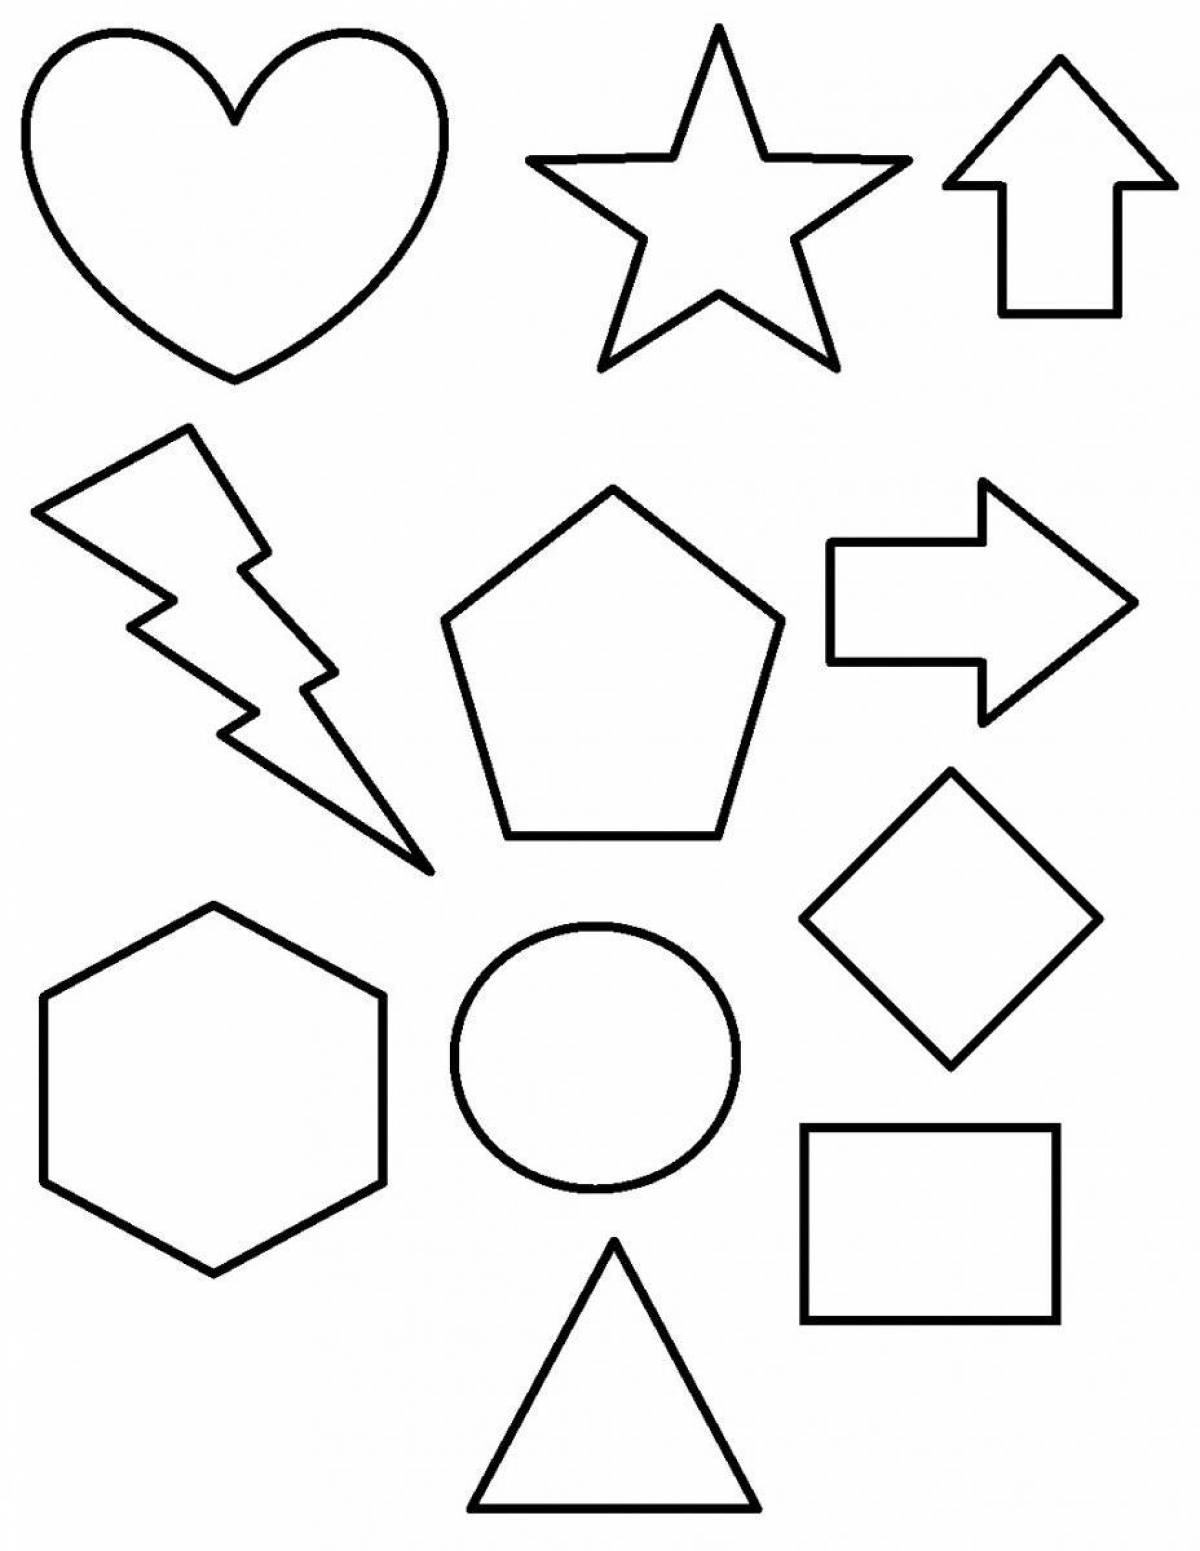 Colorful glitter geometric shapes coloring page for 3-4 year olds